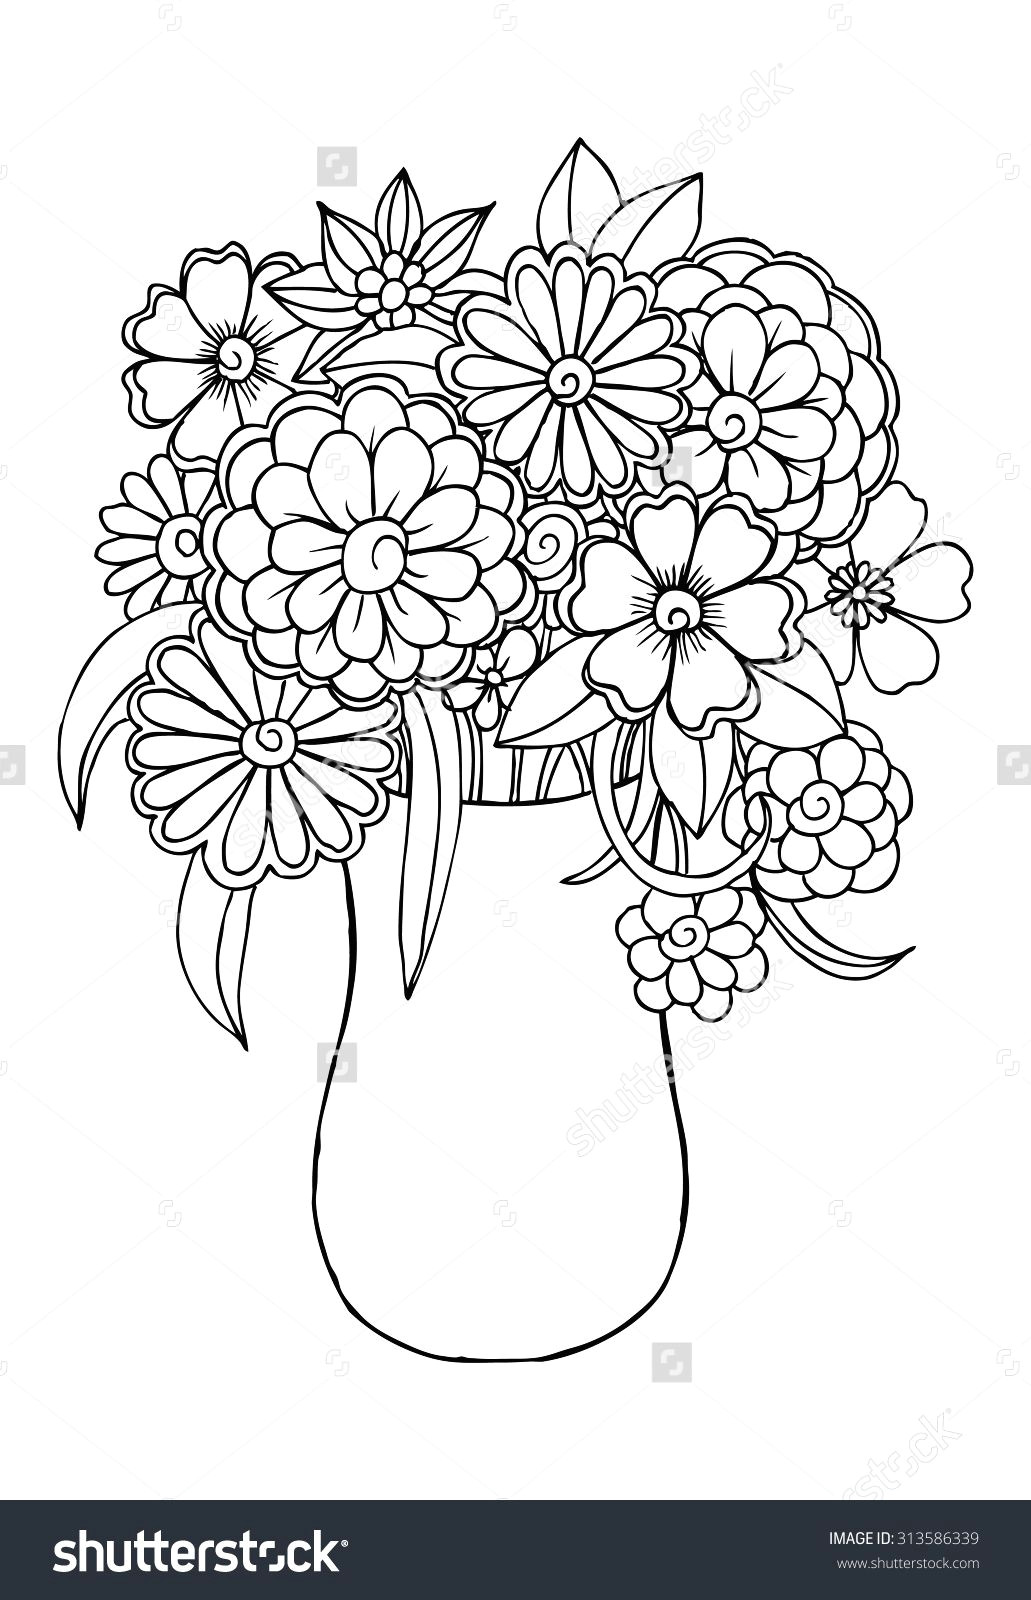 Drawing Of Rose Bush Vector Bouquet Of Flowers In A Vase Art Draw Flowers and Plants